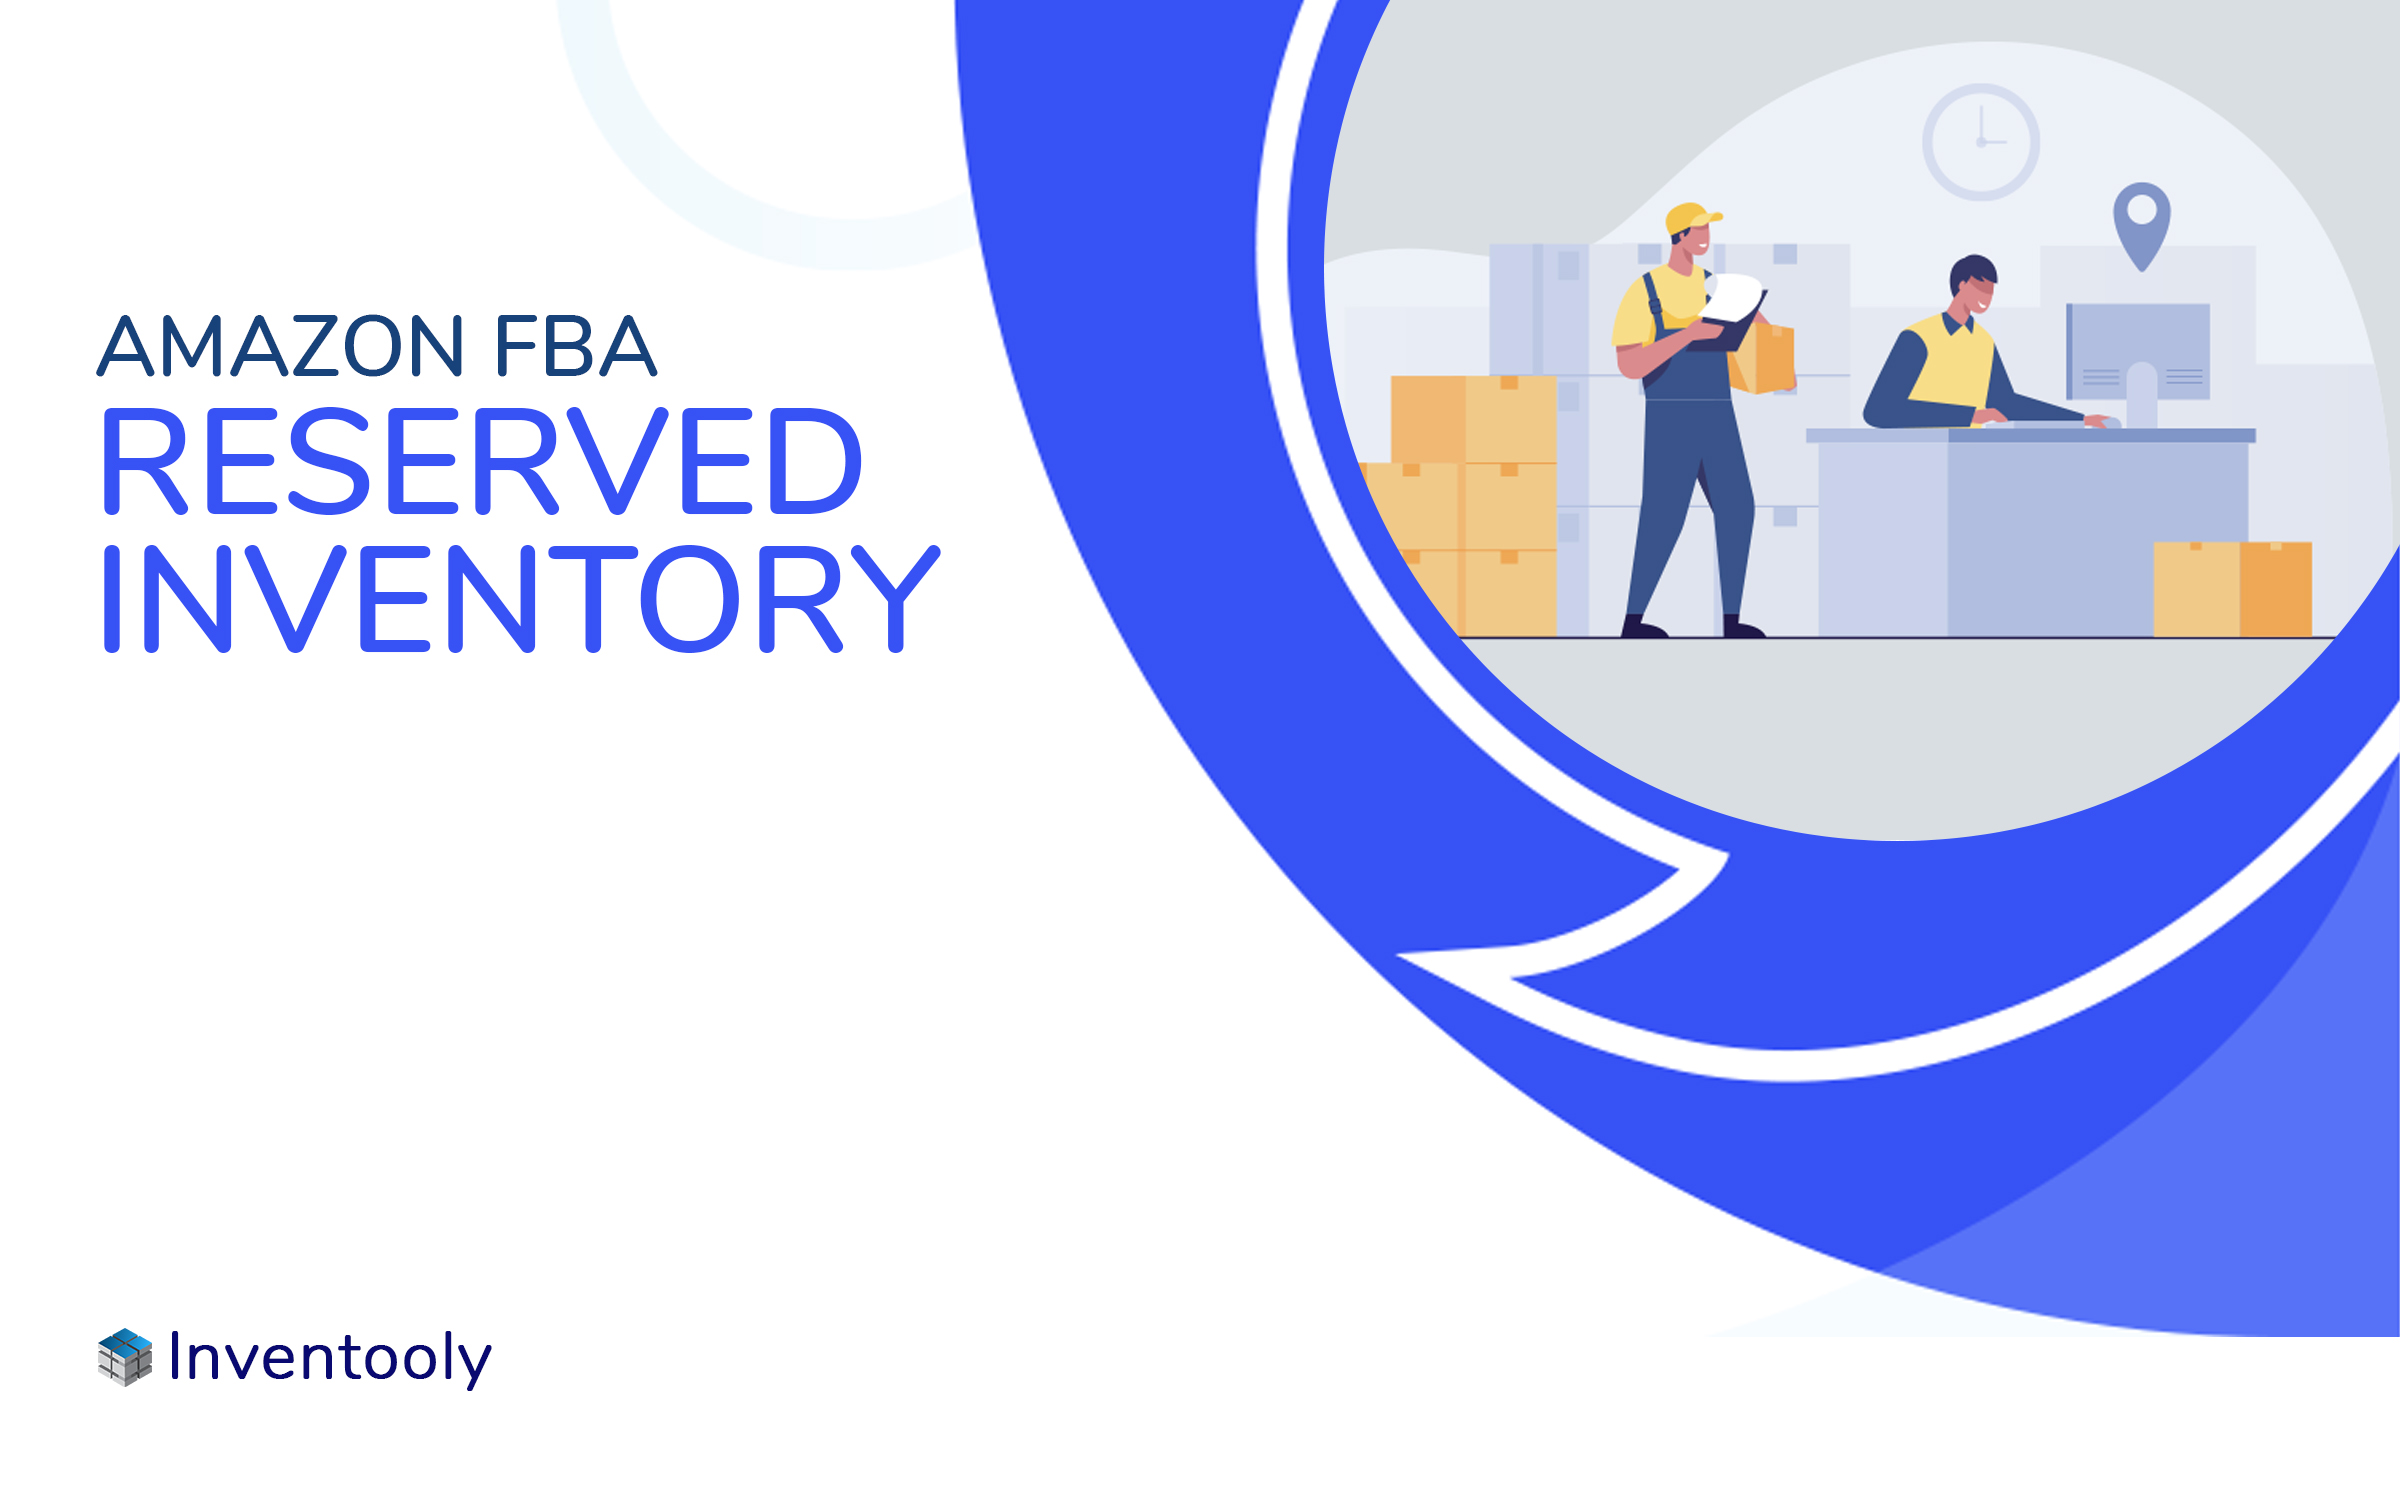 What is Amazon's FBA reserved inventory?